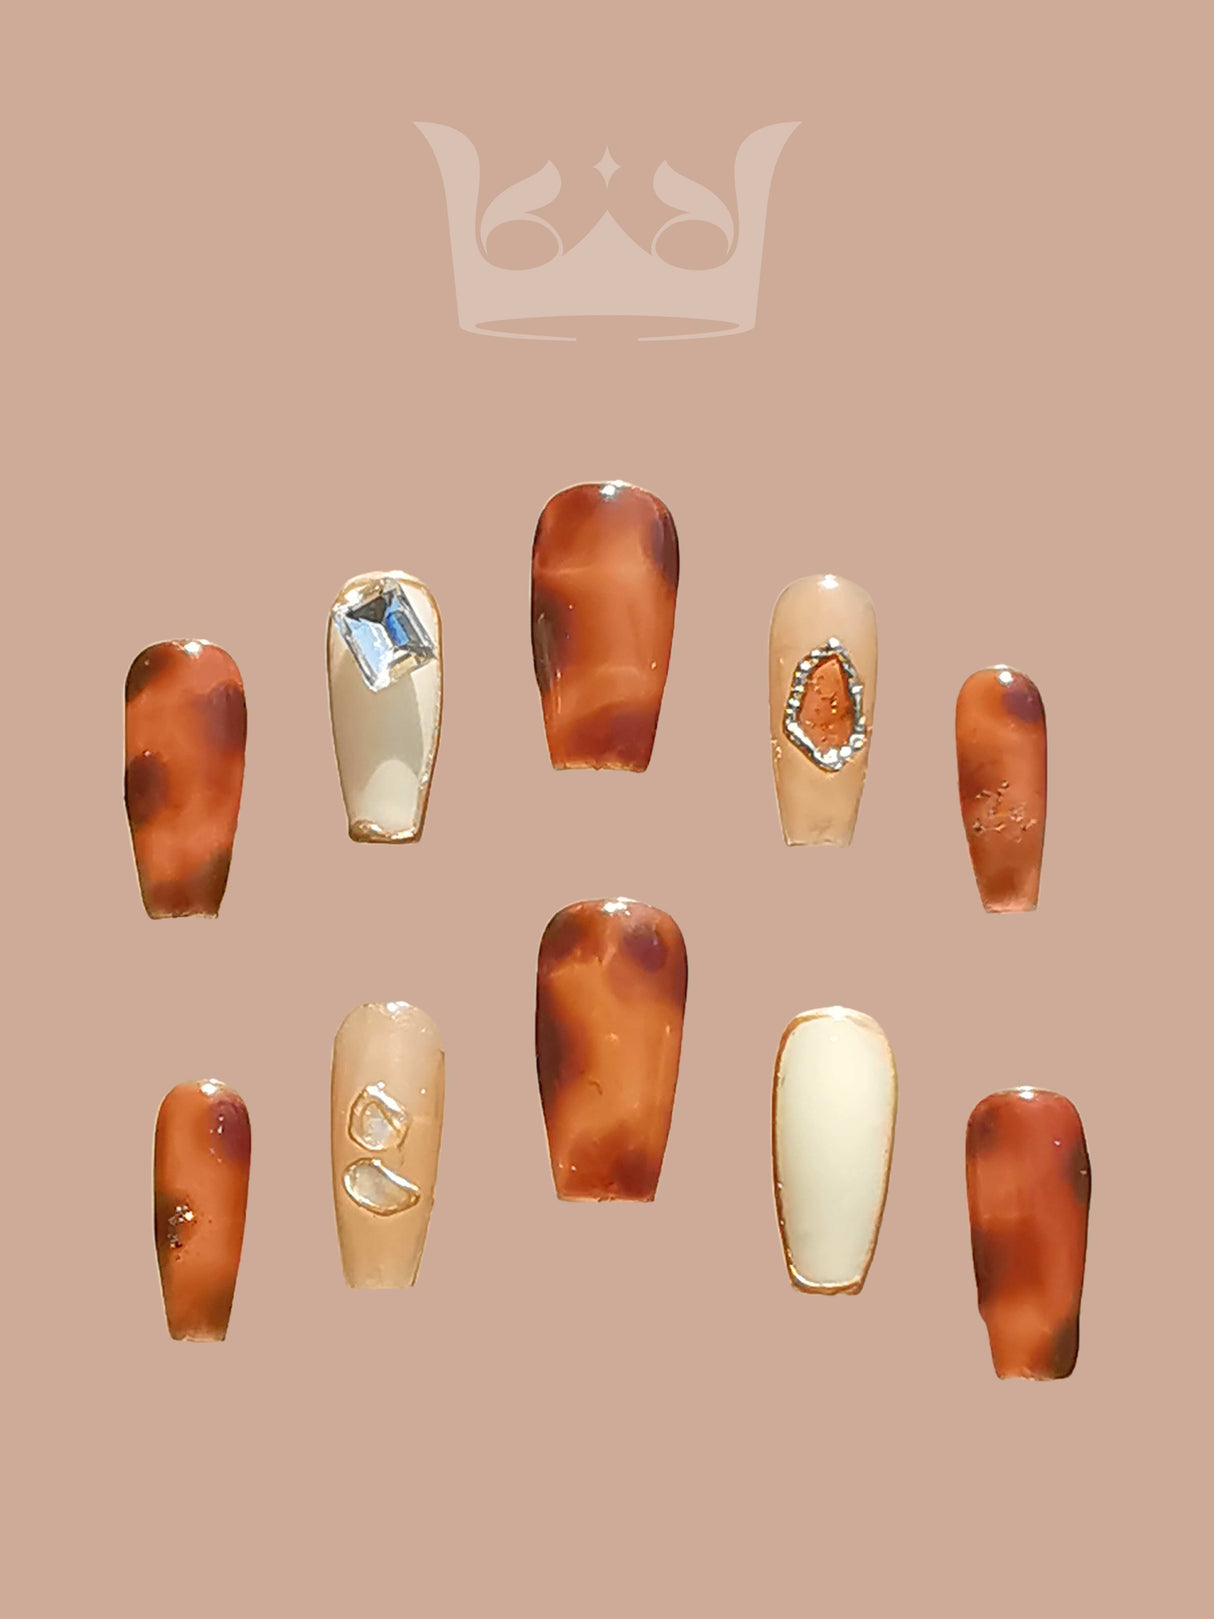 Fashionable and bold manicure statement with warm brown, amber, and translucent tones, gem-like adornments, gold frames, and embedded rings/hoops.